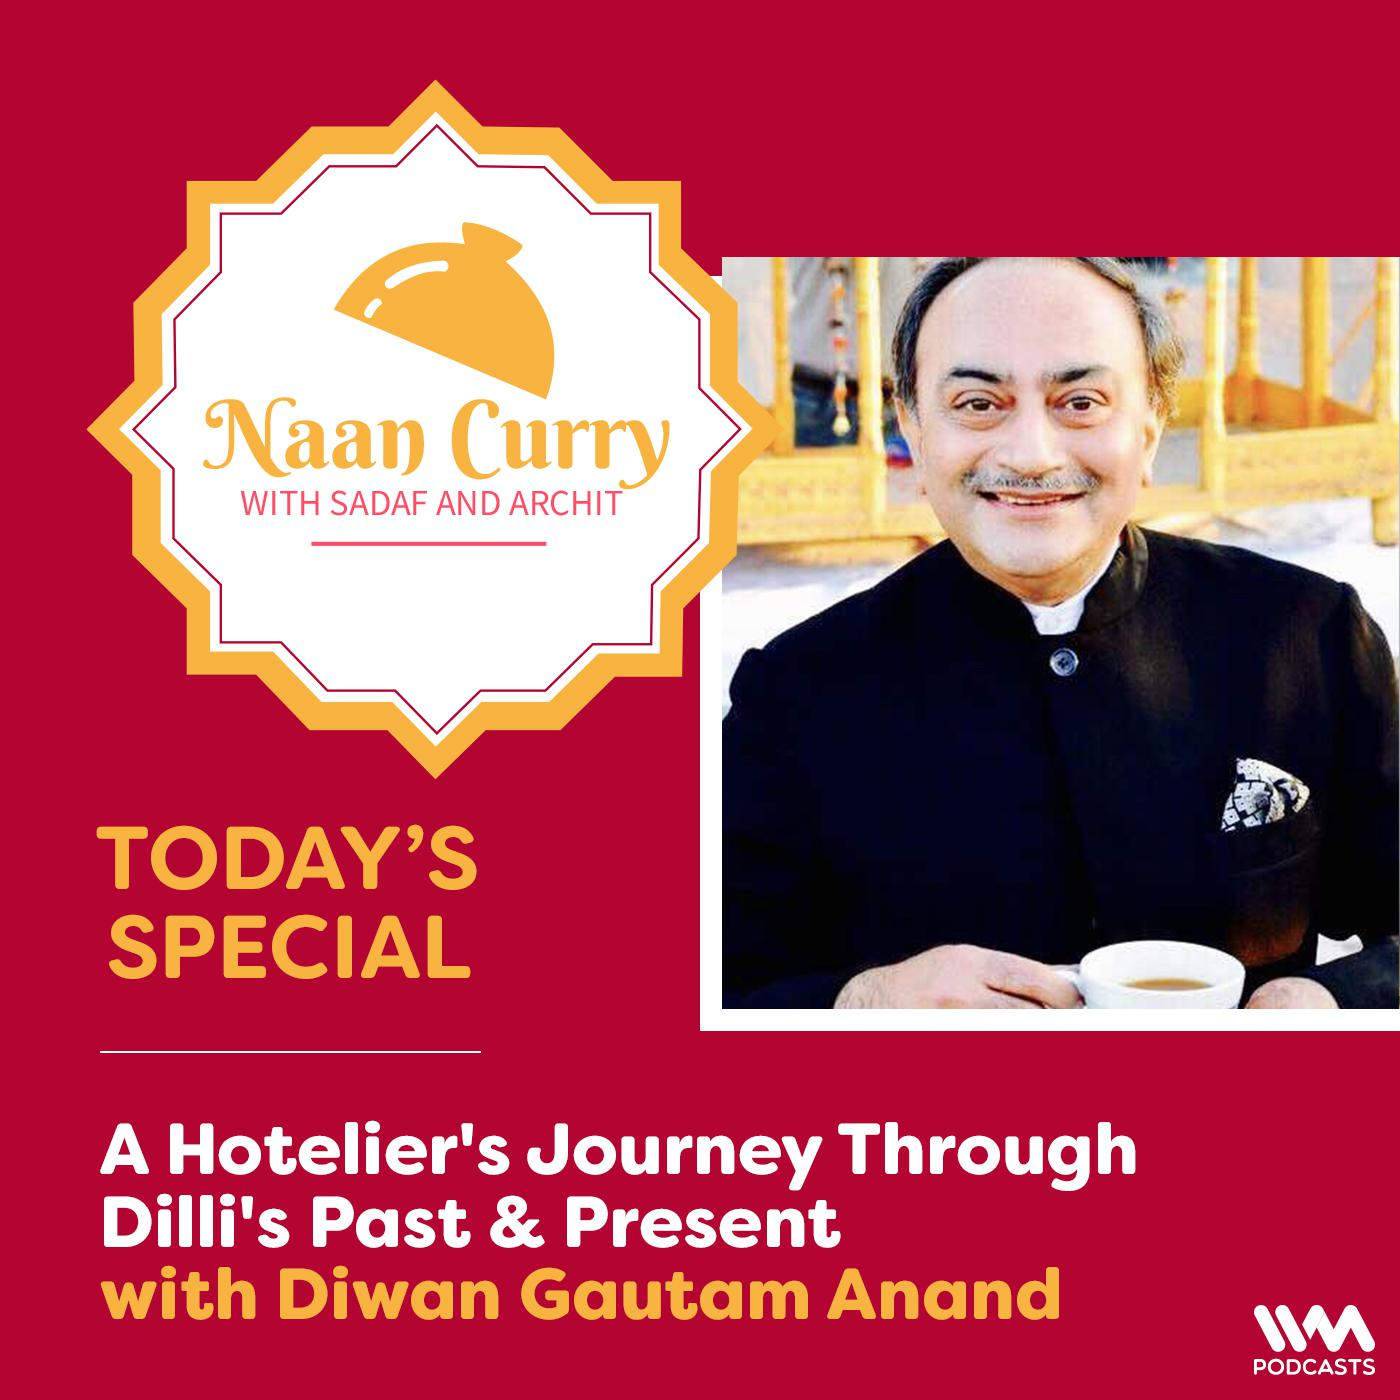 A Hotelier's Journey Through Dilli's Past & Present with Diwan Gautam Anand